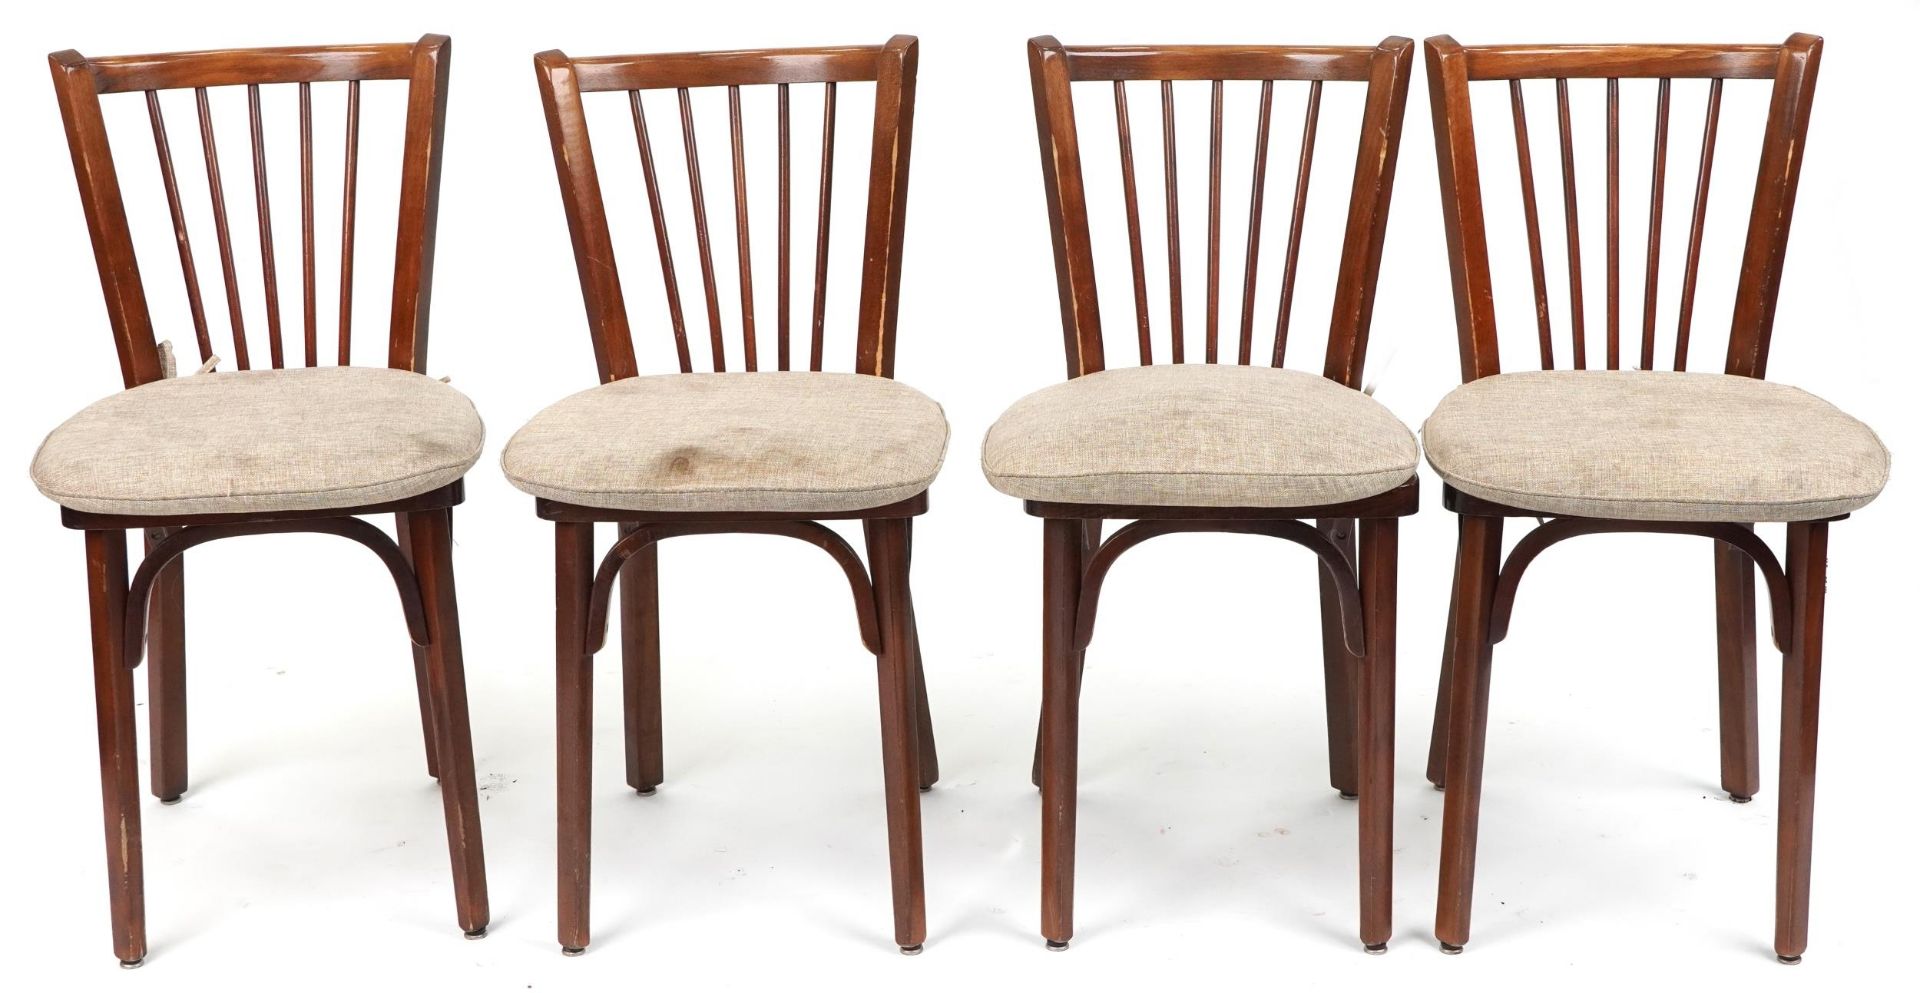 Contemporary rectangular bistro or dining table with four mahogany chairs with cushioned seats, - Image 5 of 7